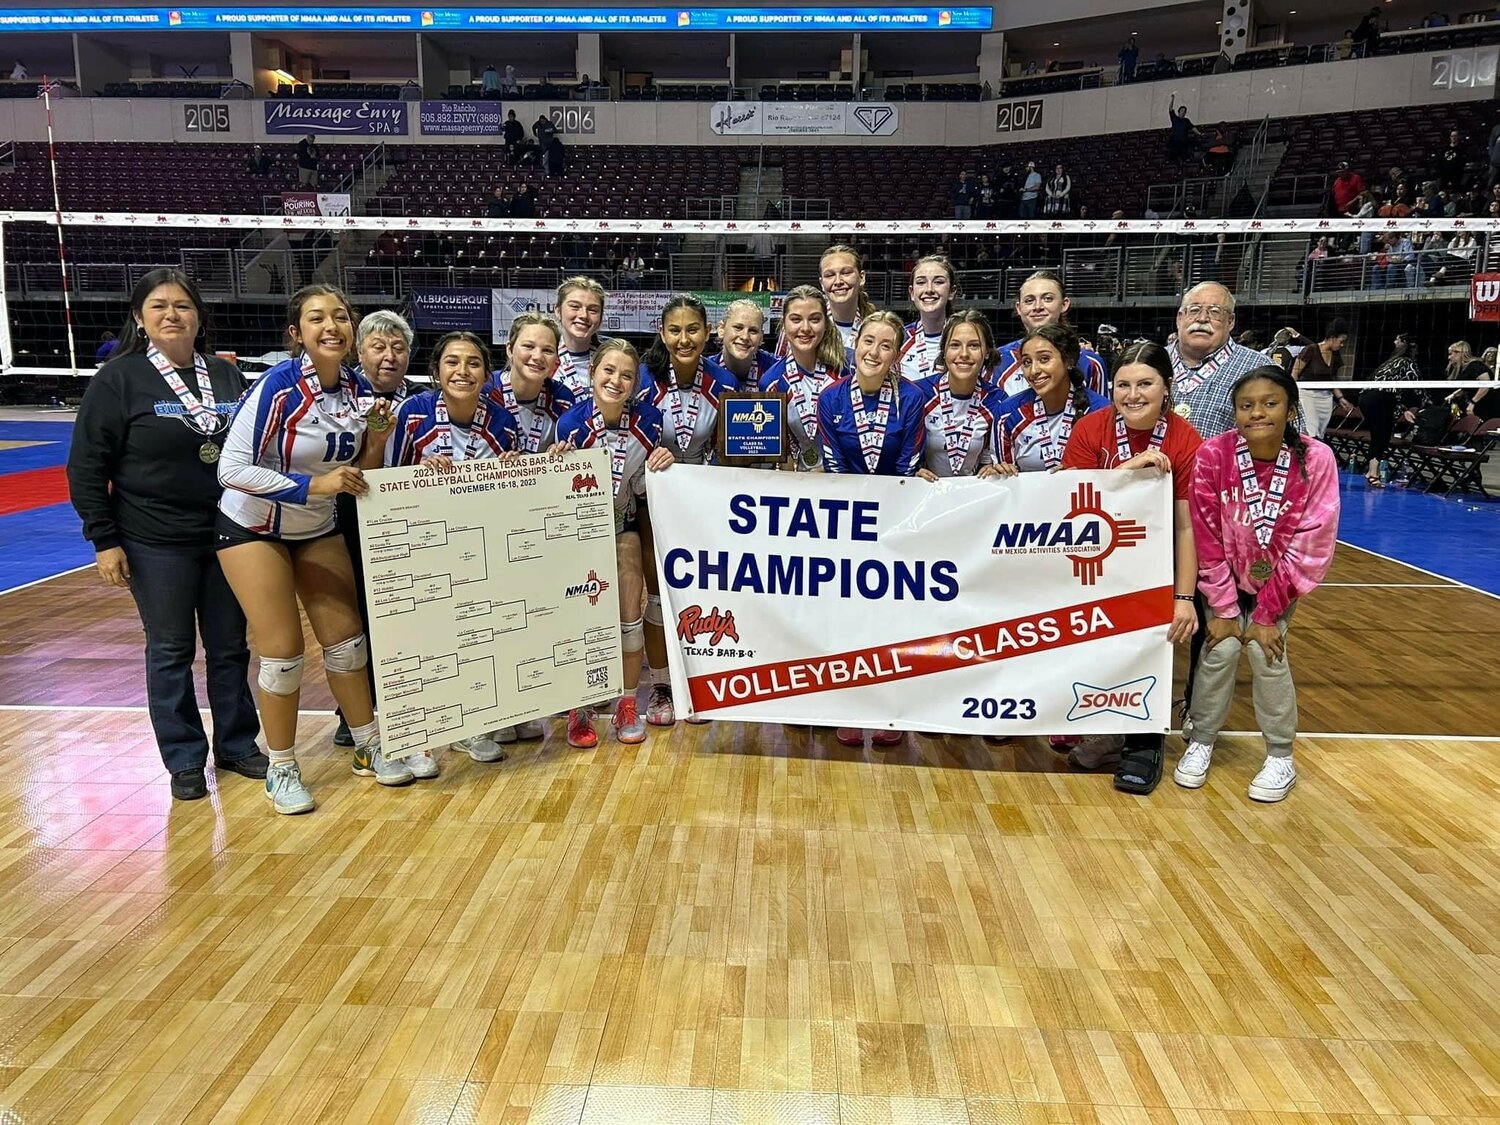 The Las Cruces High School Bulldawg volleyball team capped off an amazing 26-2 season by winning the Class 5A state championship Nov. 18 in Albuquerque. The No. 1-seeded Bulldawgs won three of four matches in the championship tournament, finishing by defeating Cibola 3-1.